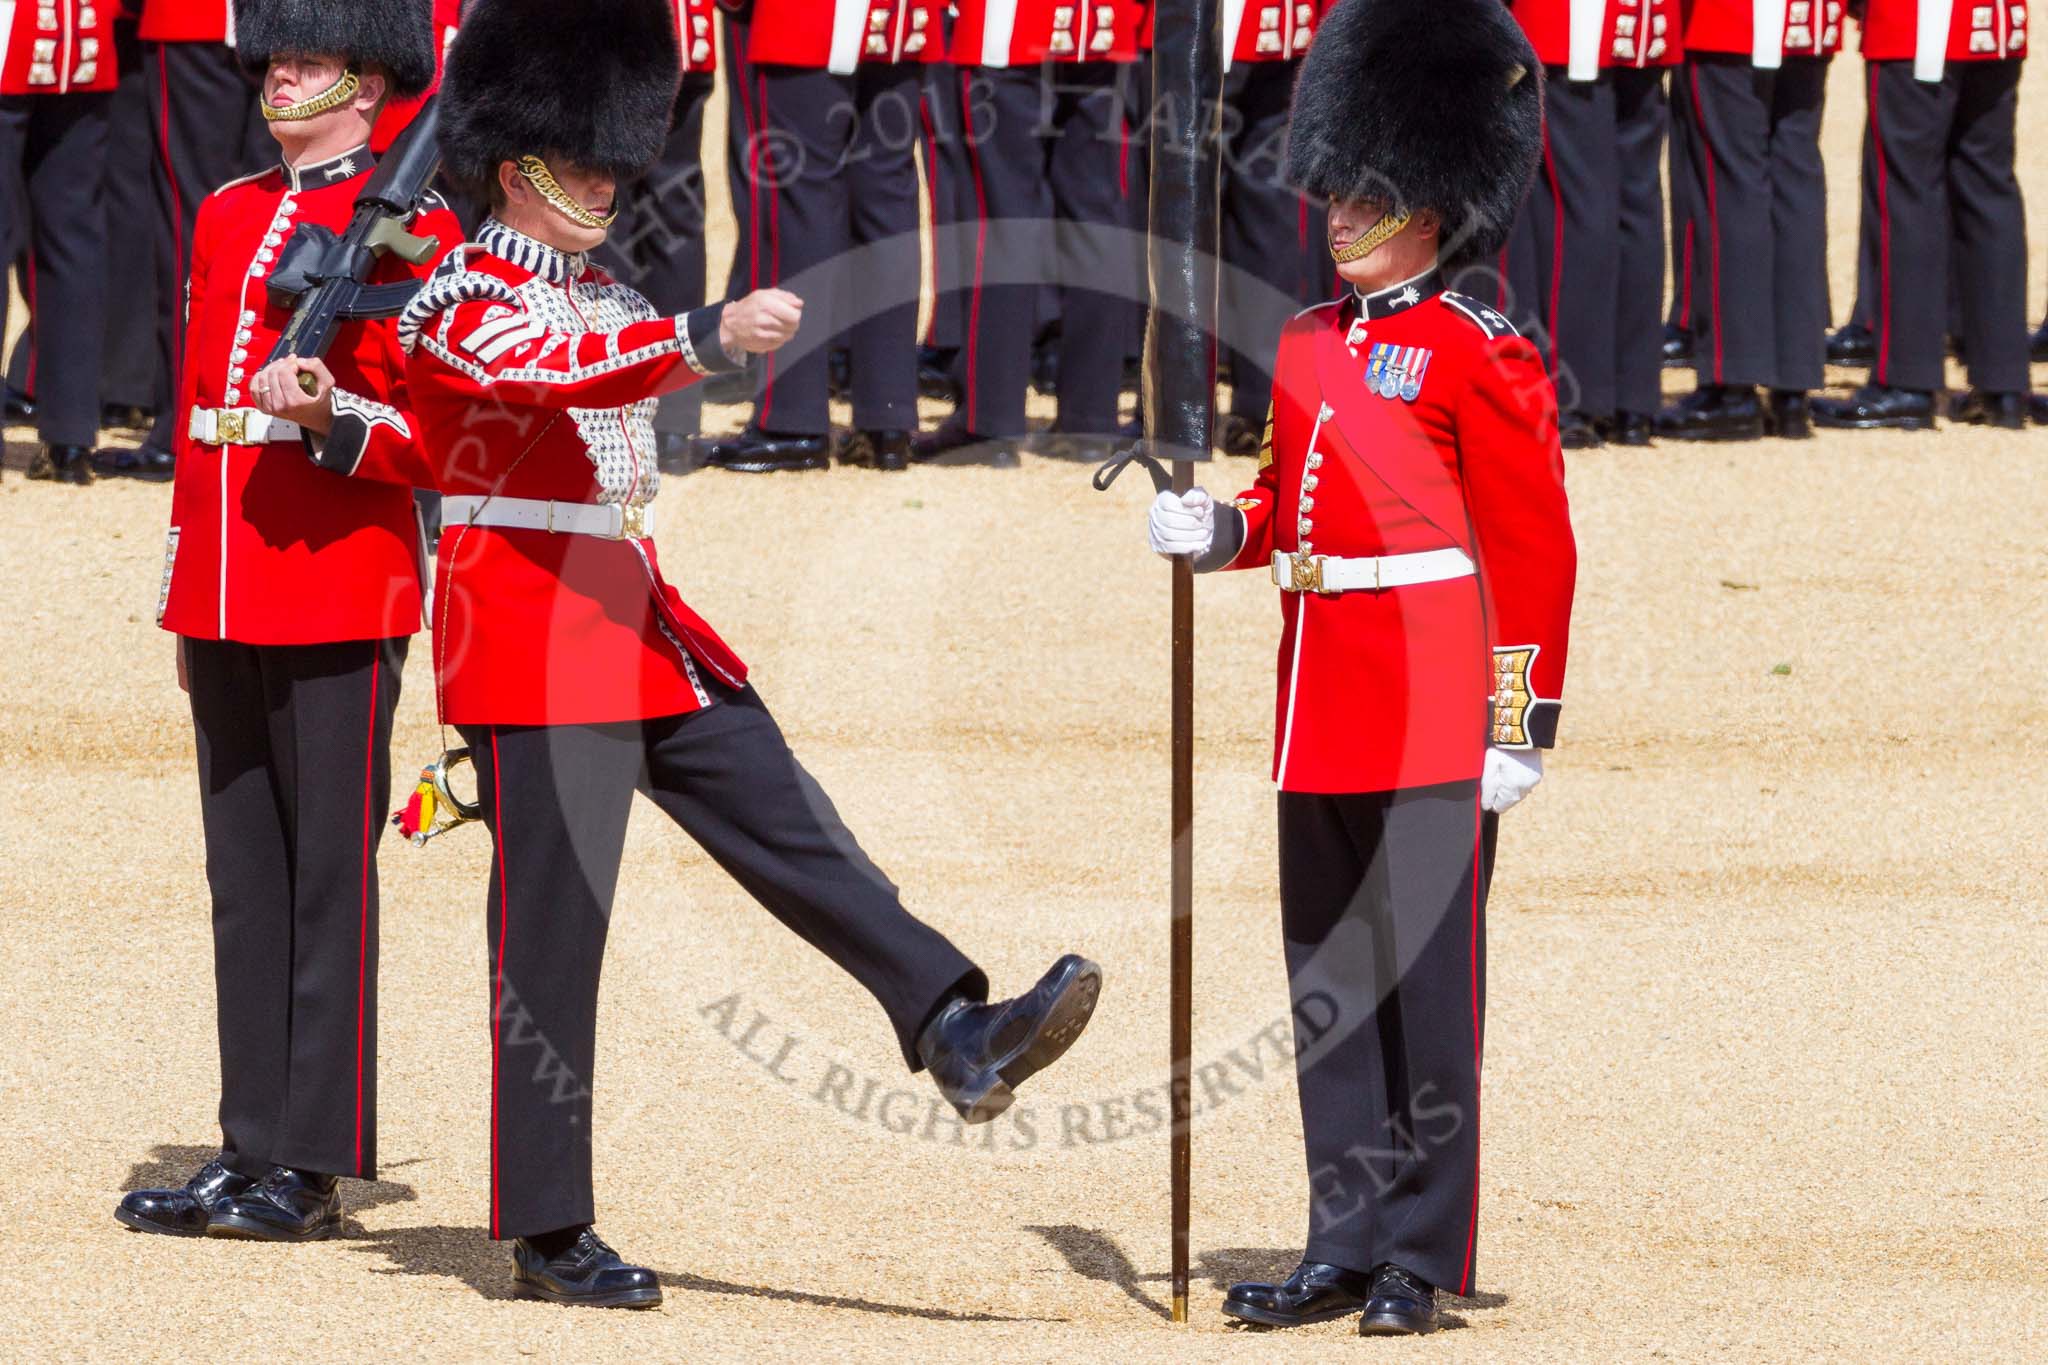 The Colonel's Review 2015.
Horse Guards Parade, Westminster,
London,

United Kingdom,
on 06 June 2015 at 10:34, image #102